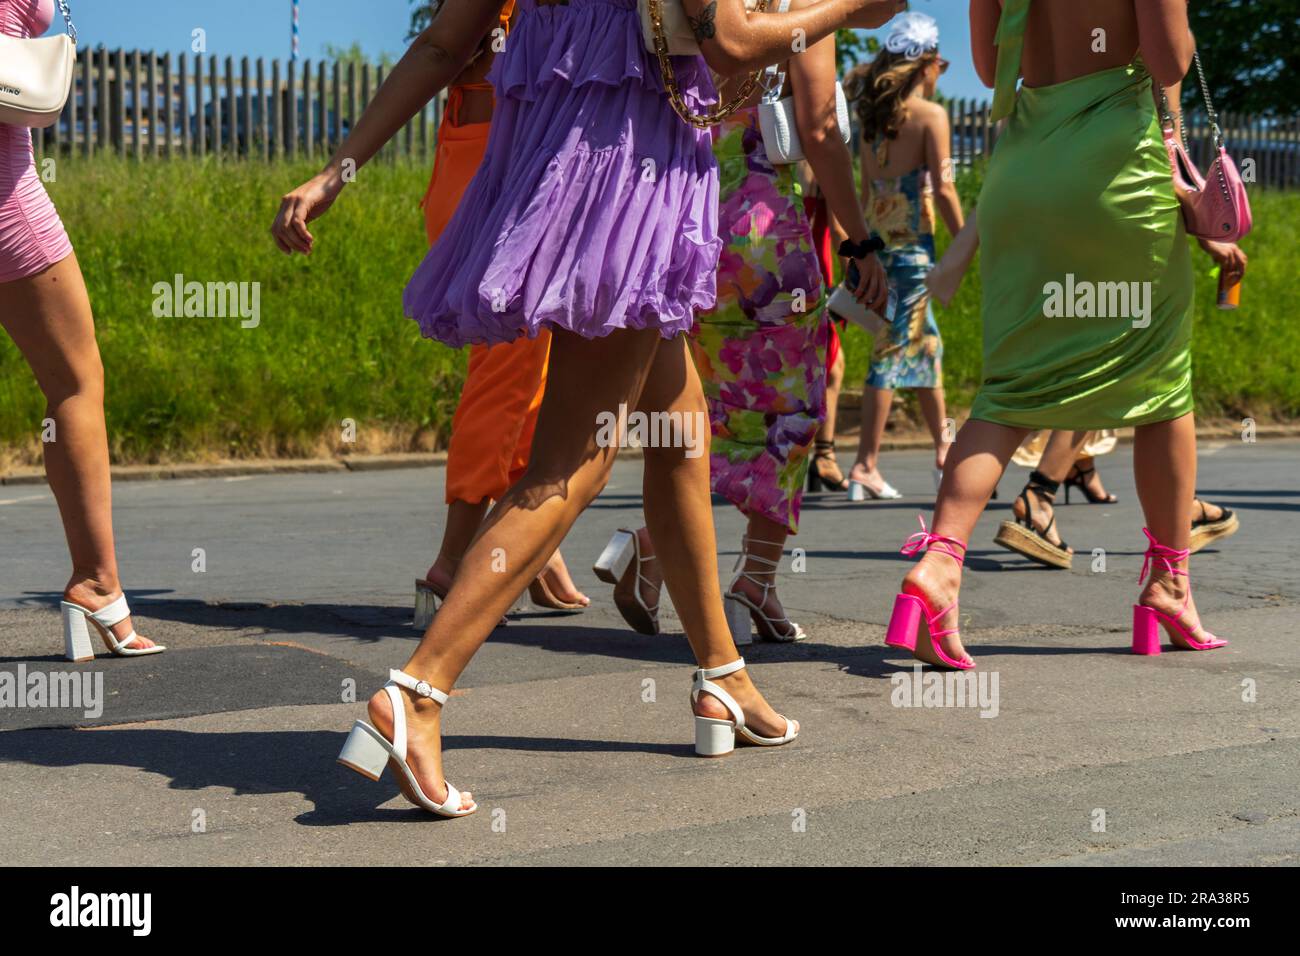 Stylish females, unrecognizable women, walk to racecourse entrance on race day in England. Horse racing is a popular sport and requires proper attire. Stock Photo